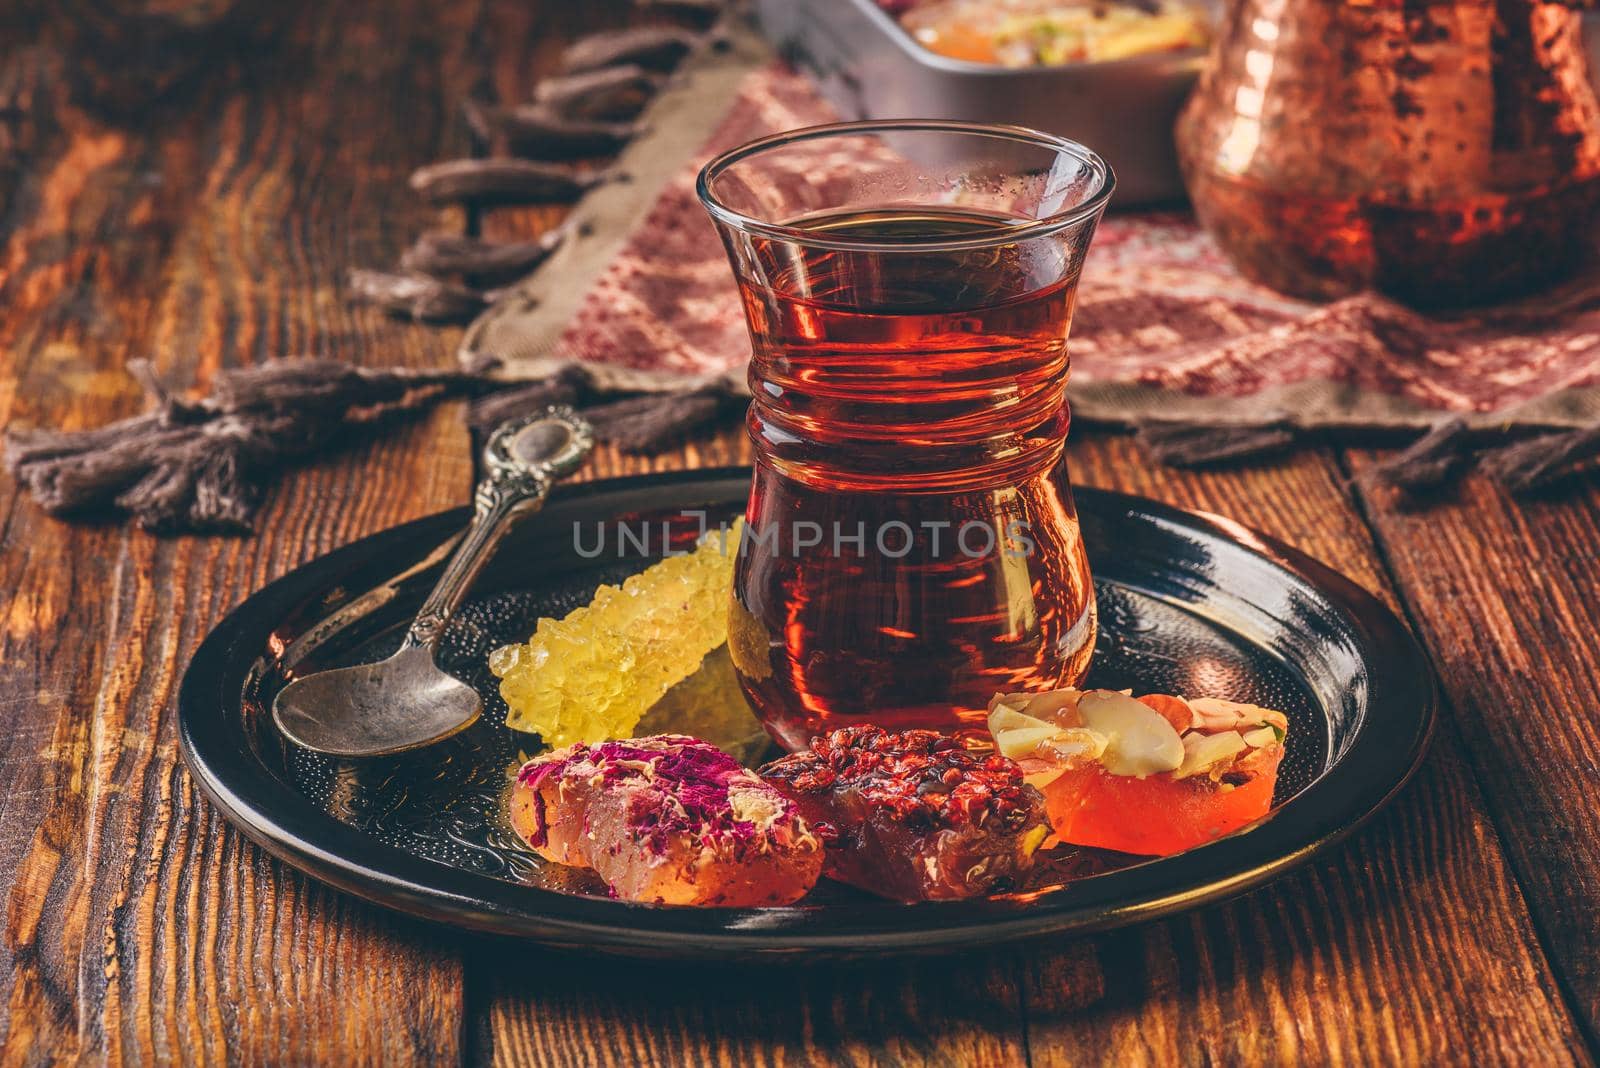 Tea in armudu glass with oriental delight rahat lokum on metal tray over wooden surface and tablecloth